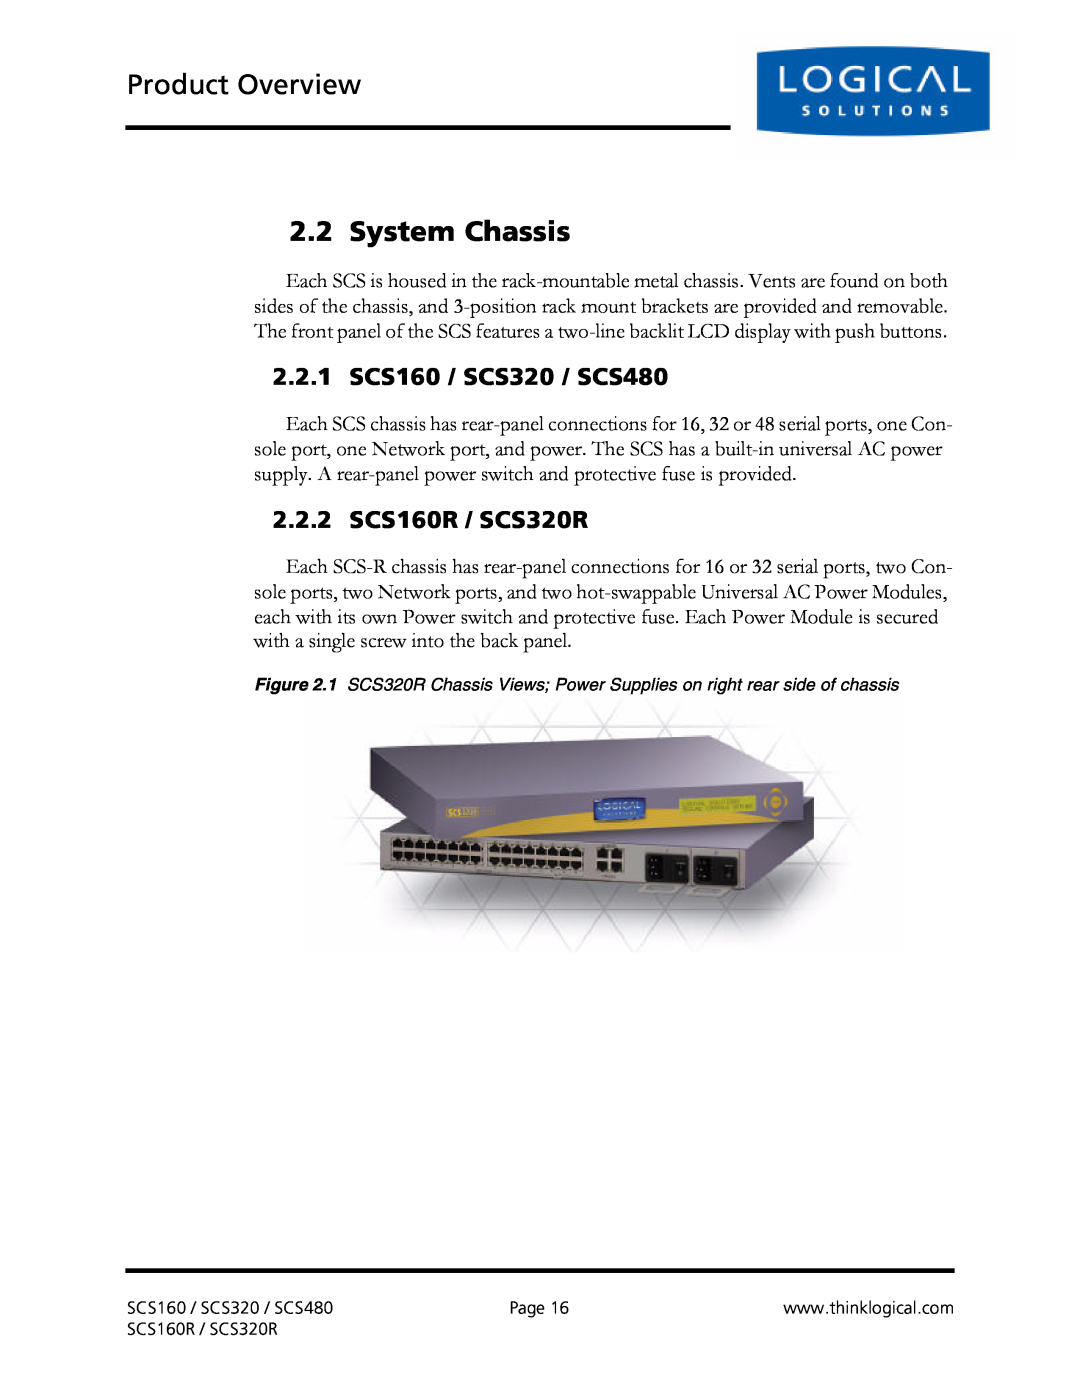 Logical Solutions SCS-R manual Product Overview, System Chassis, 2.2.1 SCS160 / SCS320 / SCS480, 2.2.2 SCS160R / SCS320R 